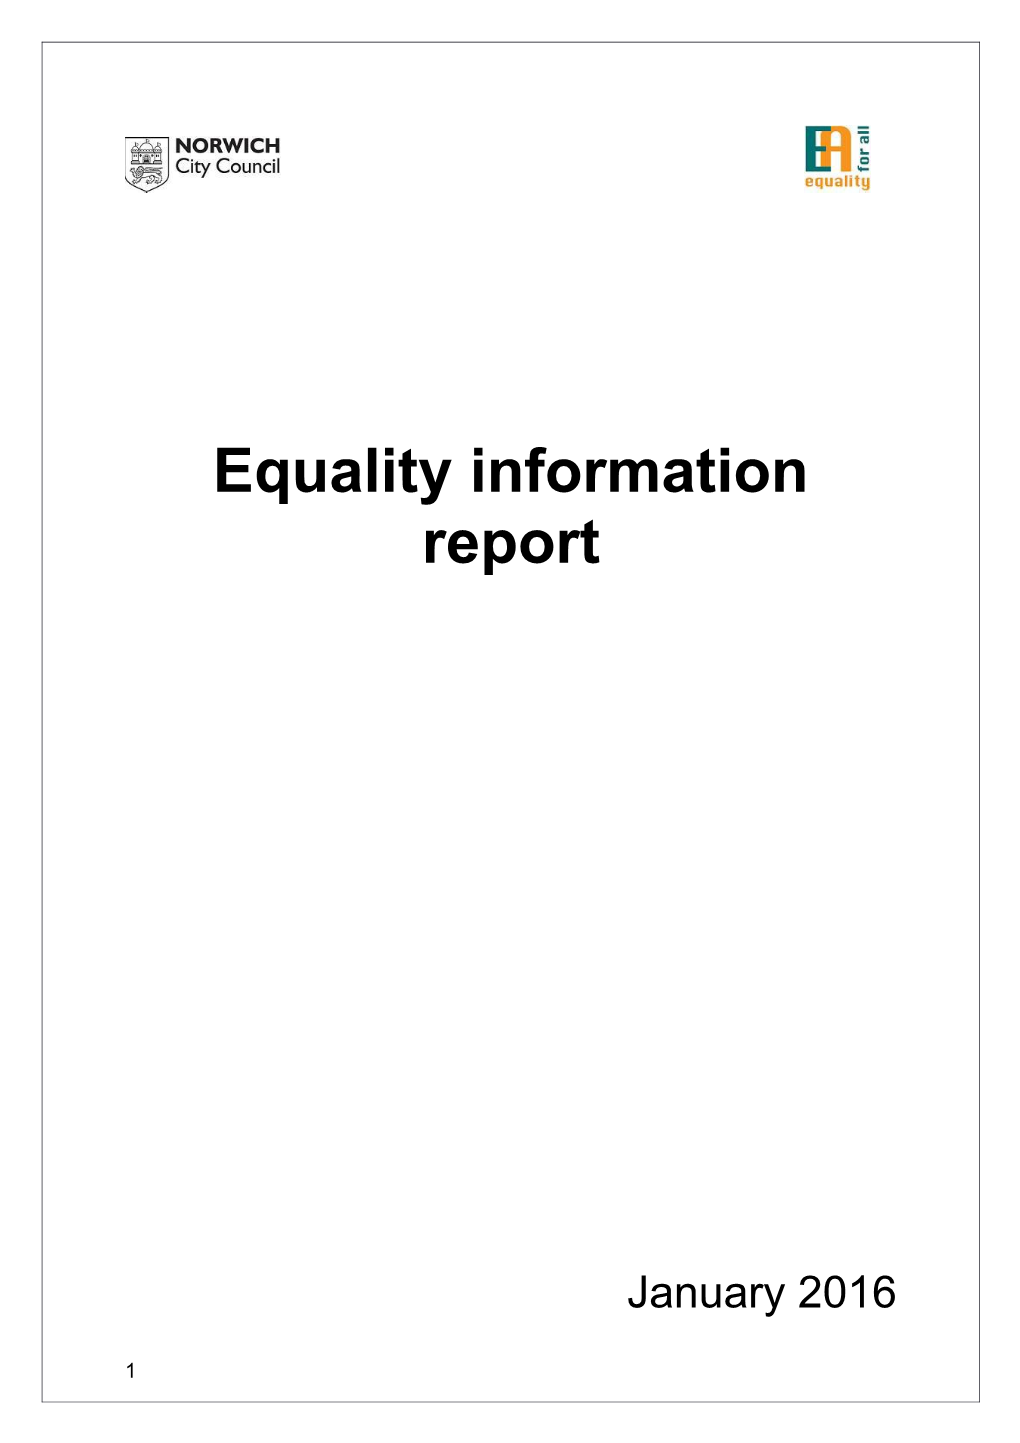 Equality Information Report